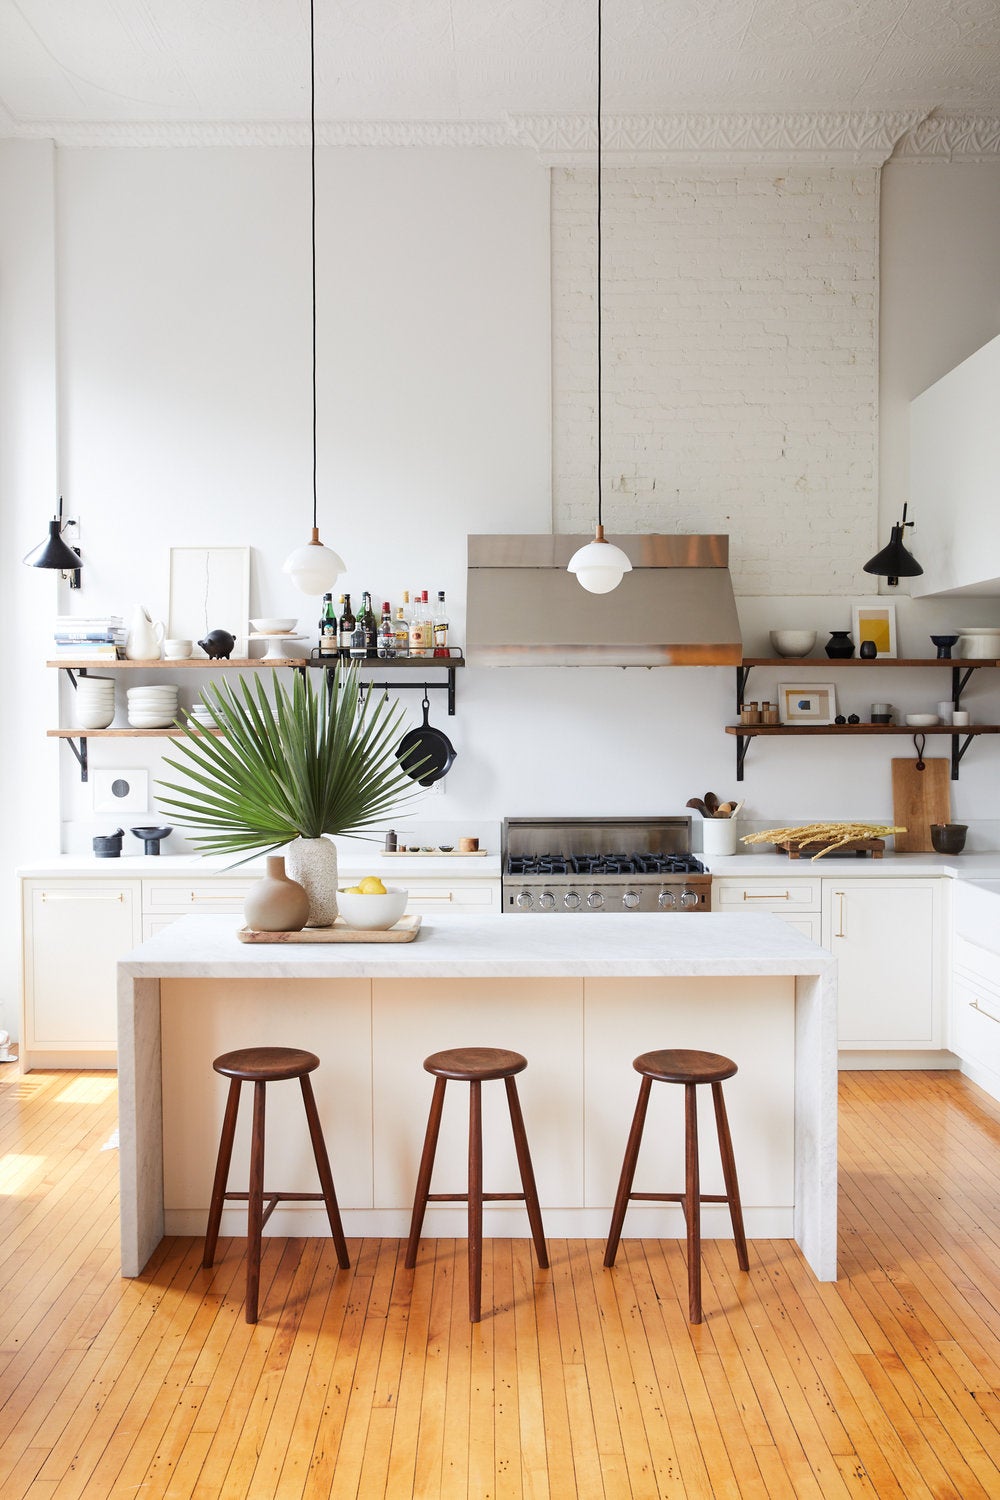 18 Beautiful Kitchen Ideas That Will Take Your Breath Away